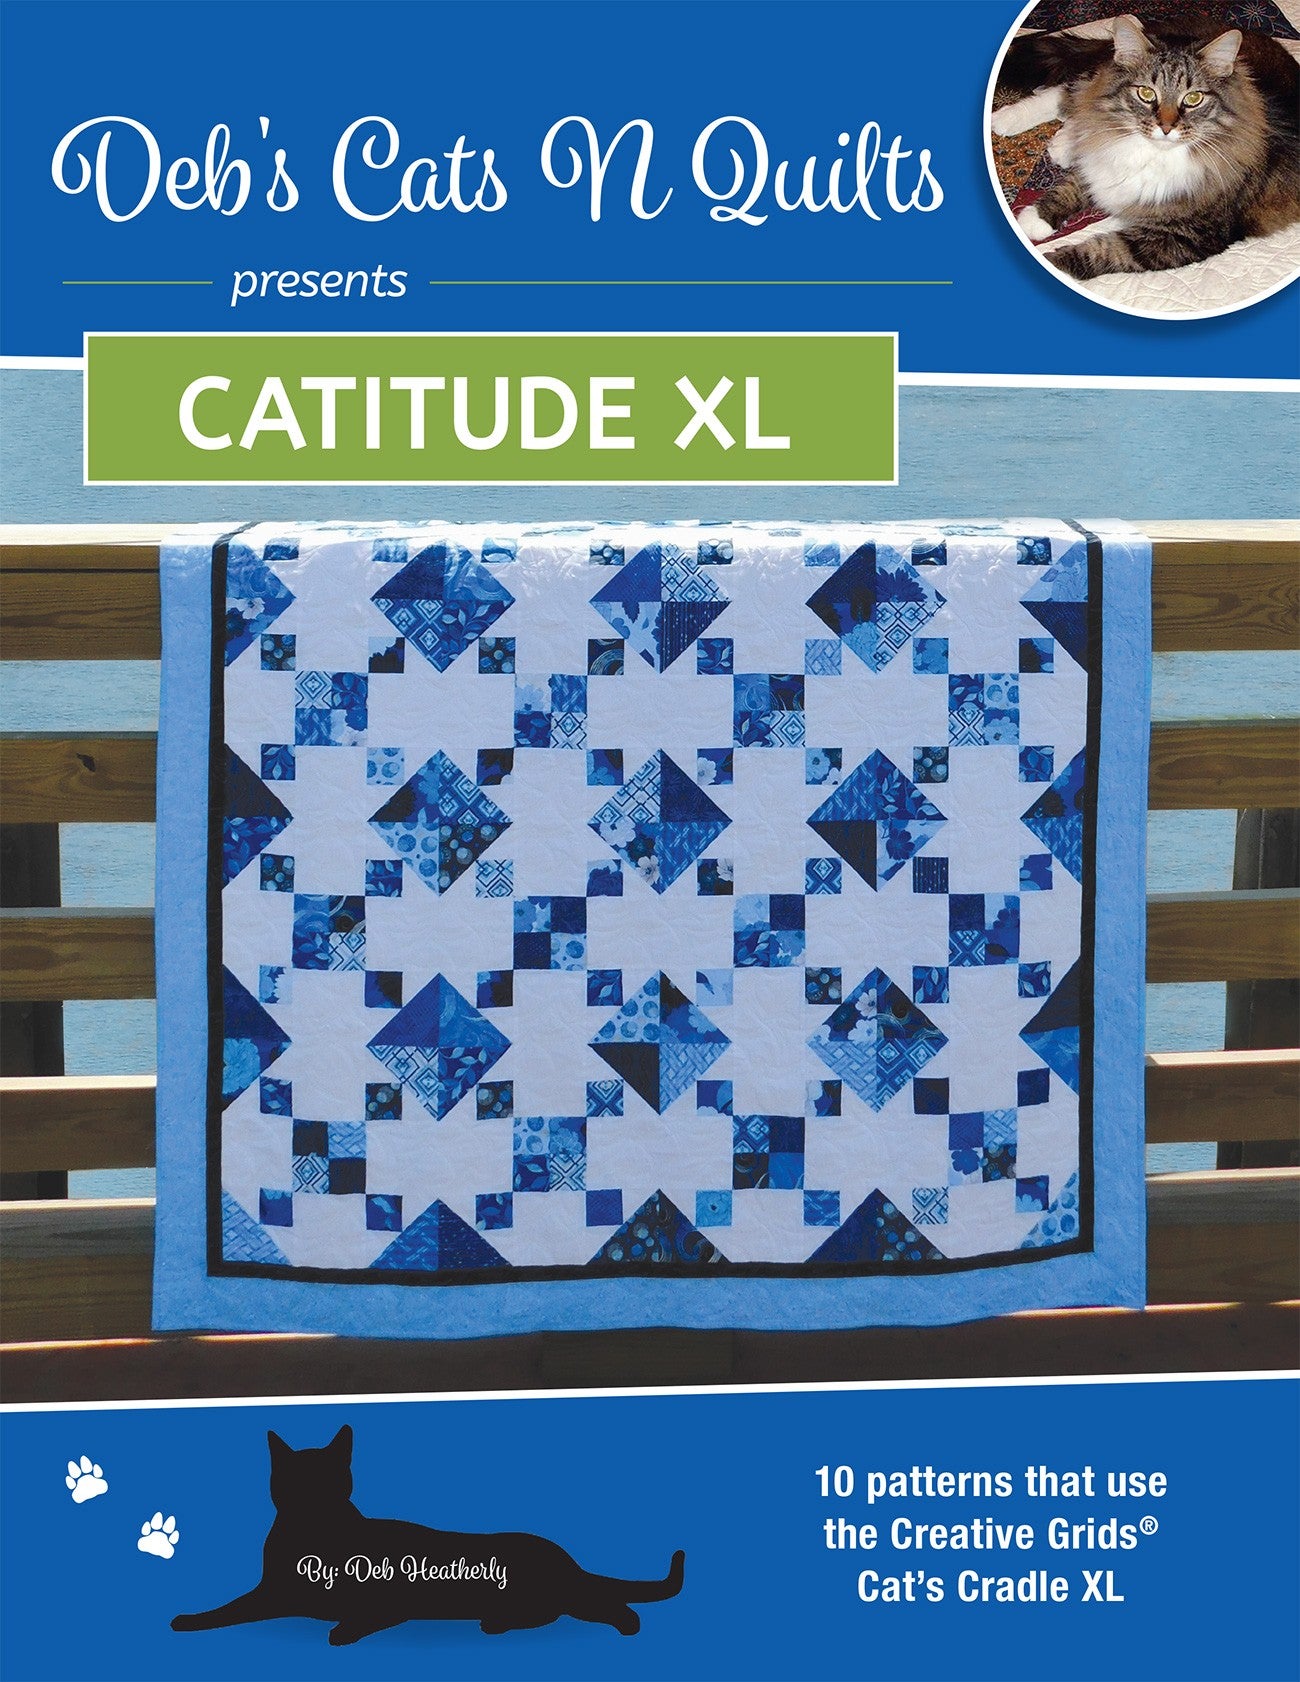 Catitude XL Quilt Pattern Book by Deb Heatherly of Deb's Cats N Quilts